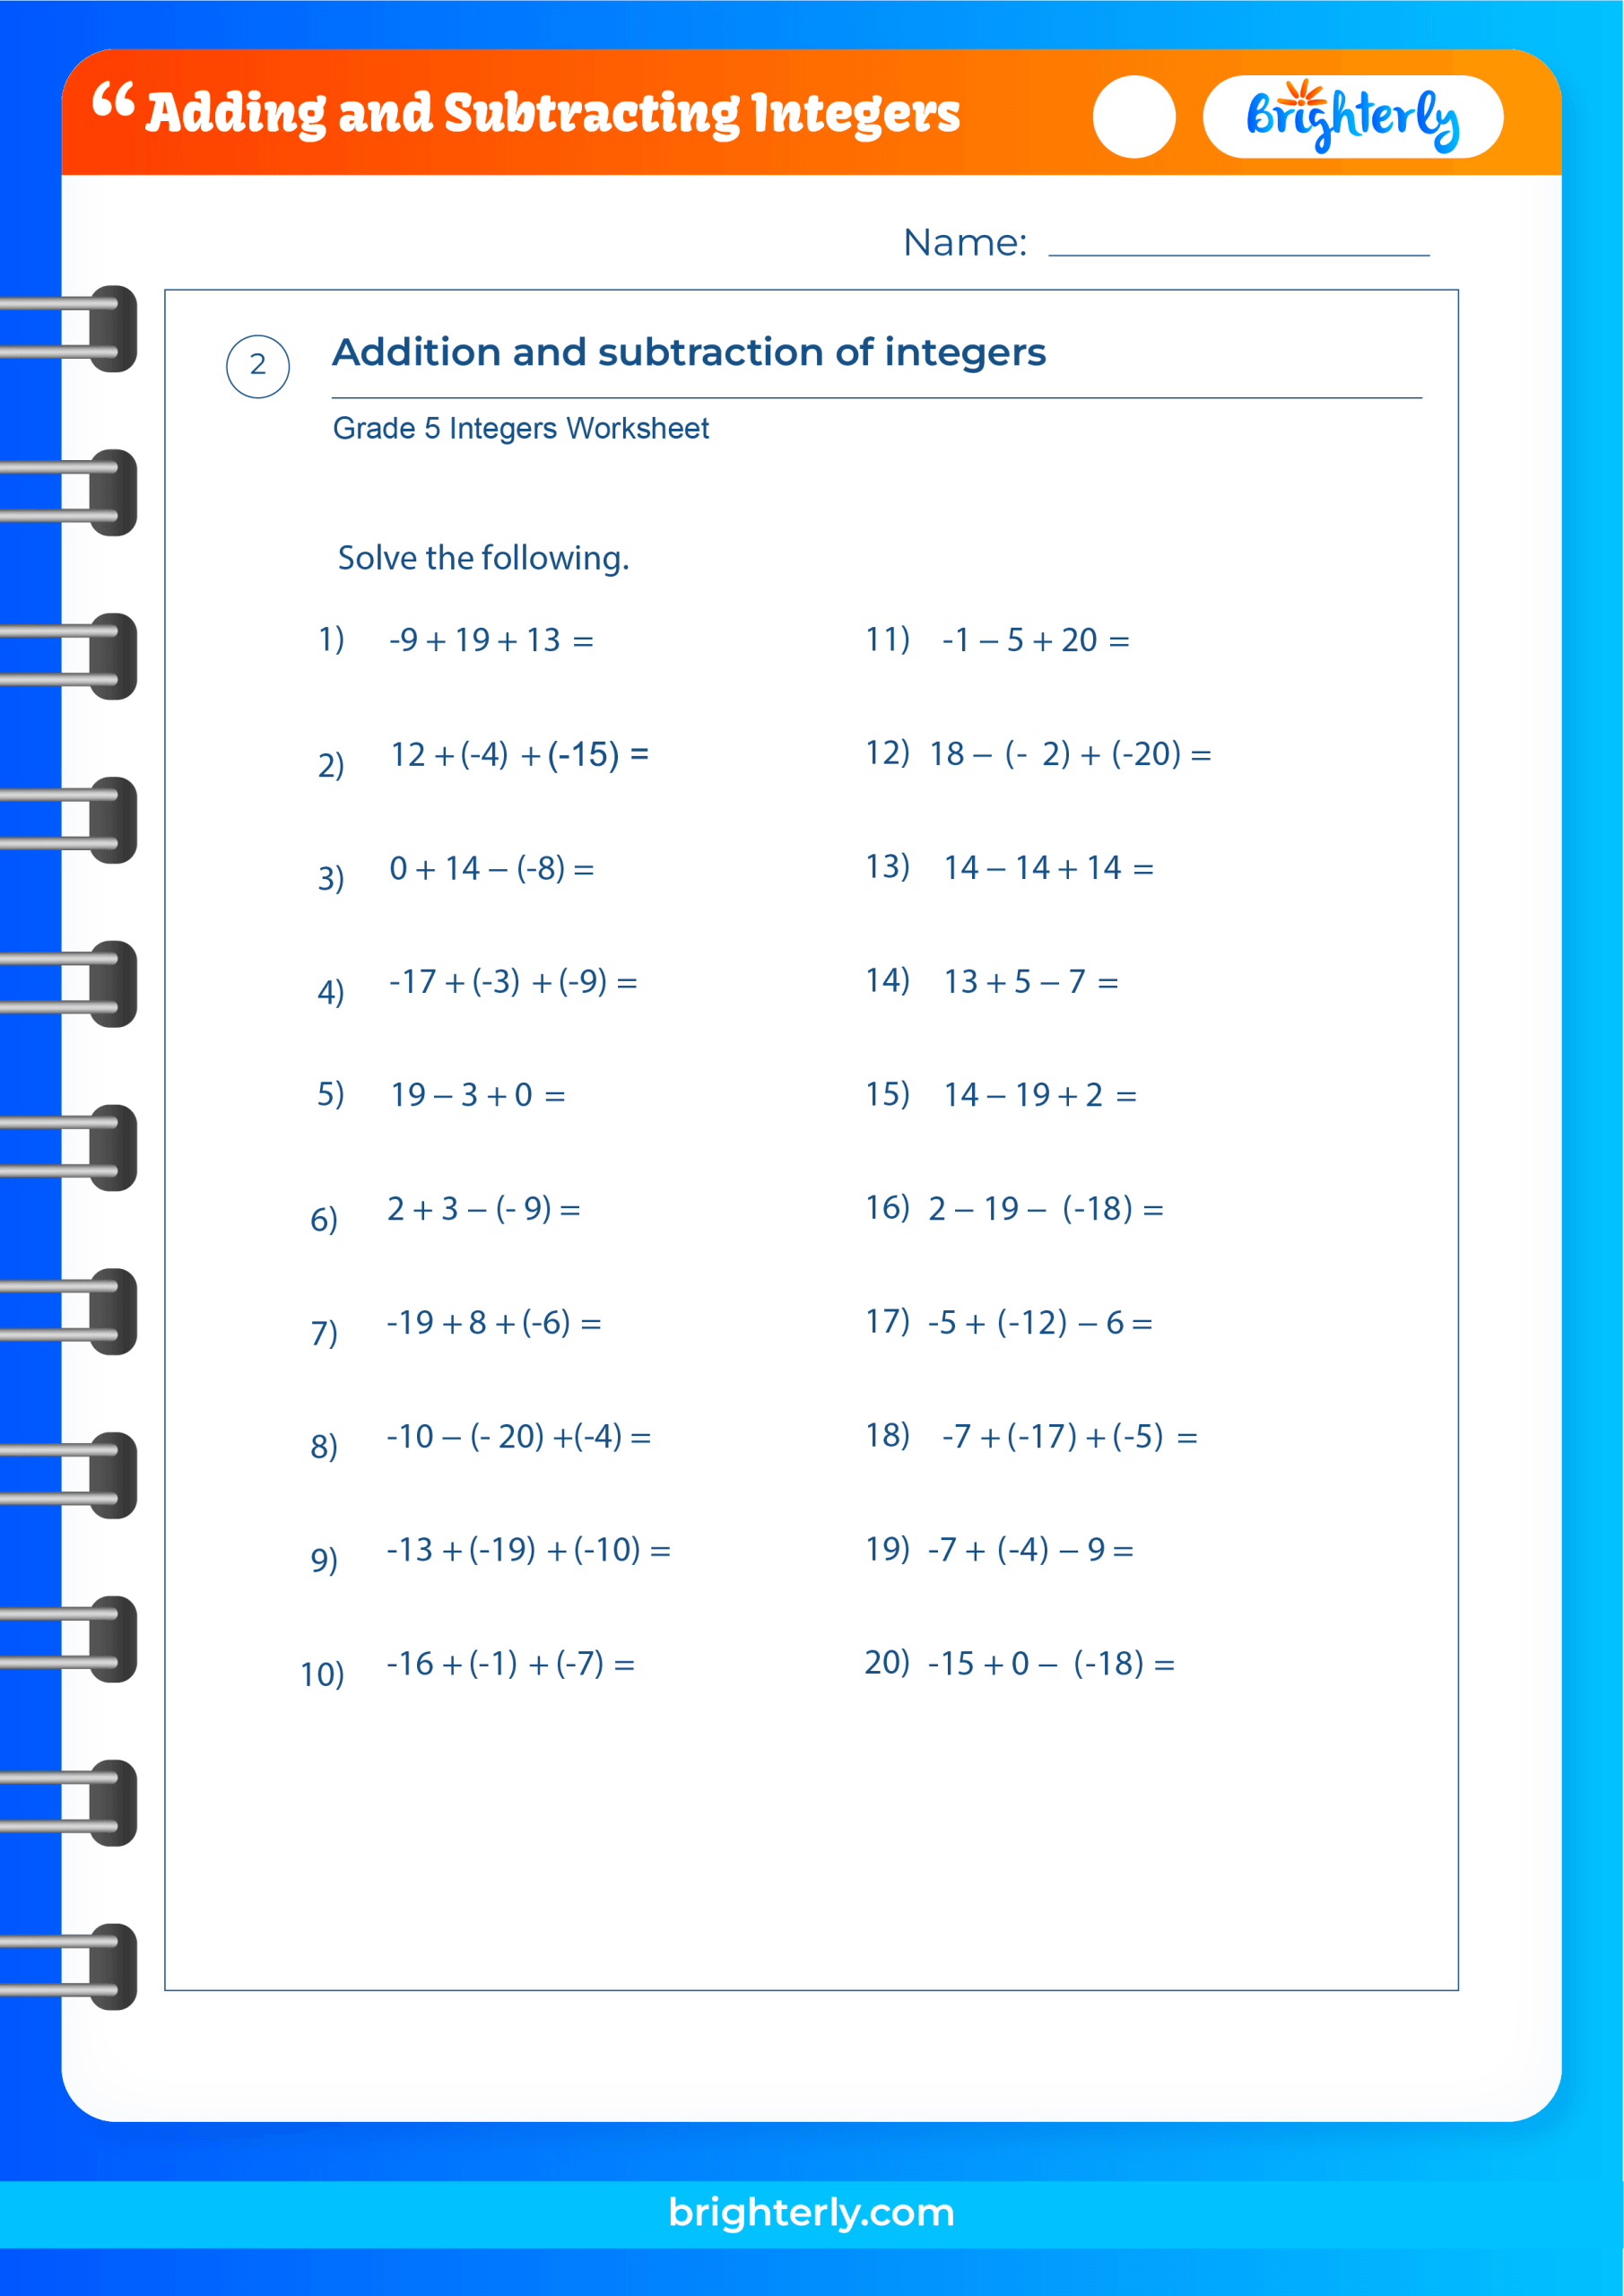 free-printable-adding-and-subtracting-integers-worksheets-pdfs